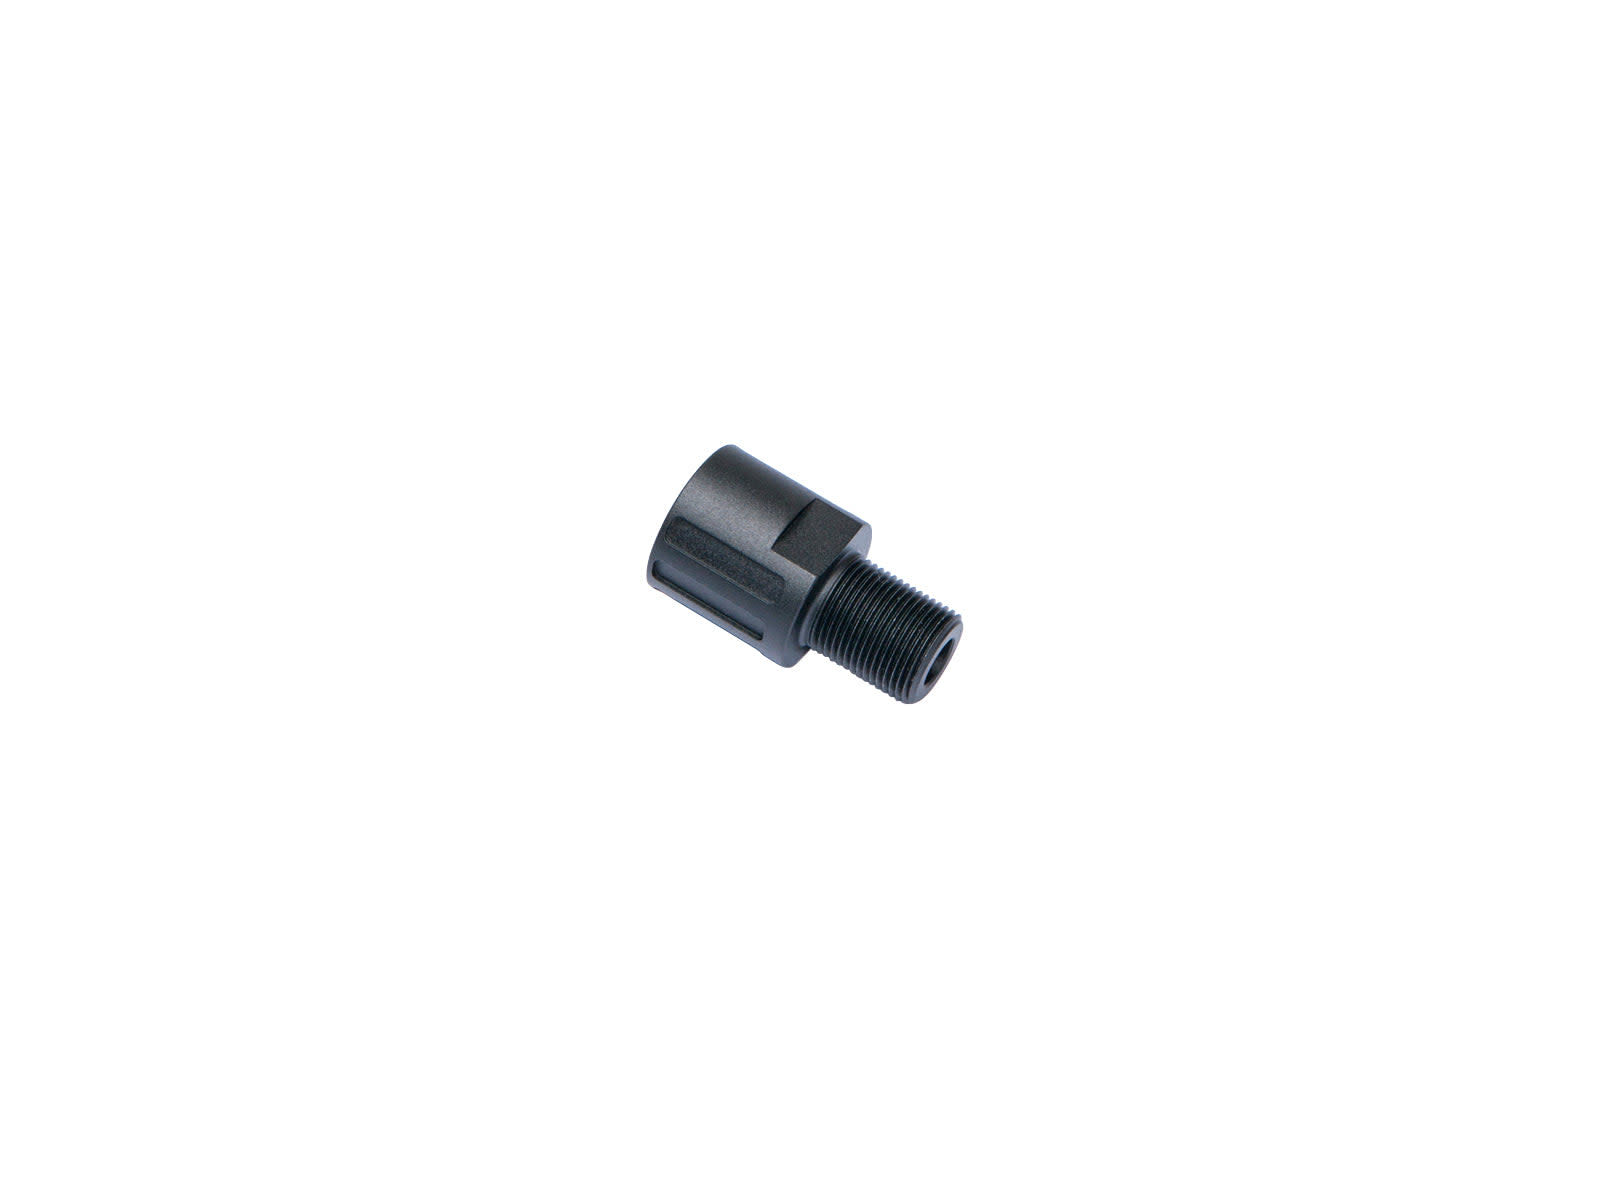 ASG 18mm to 14mm CCW Thread Adapter for CZ Scorpion